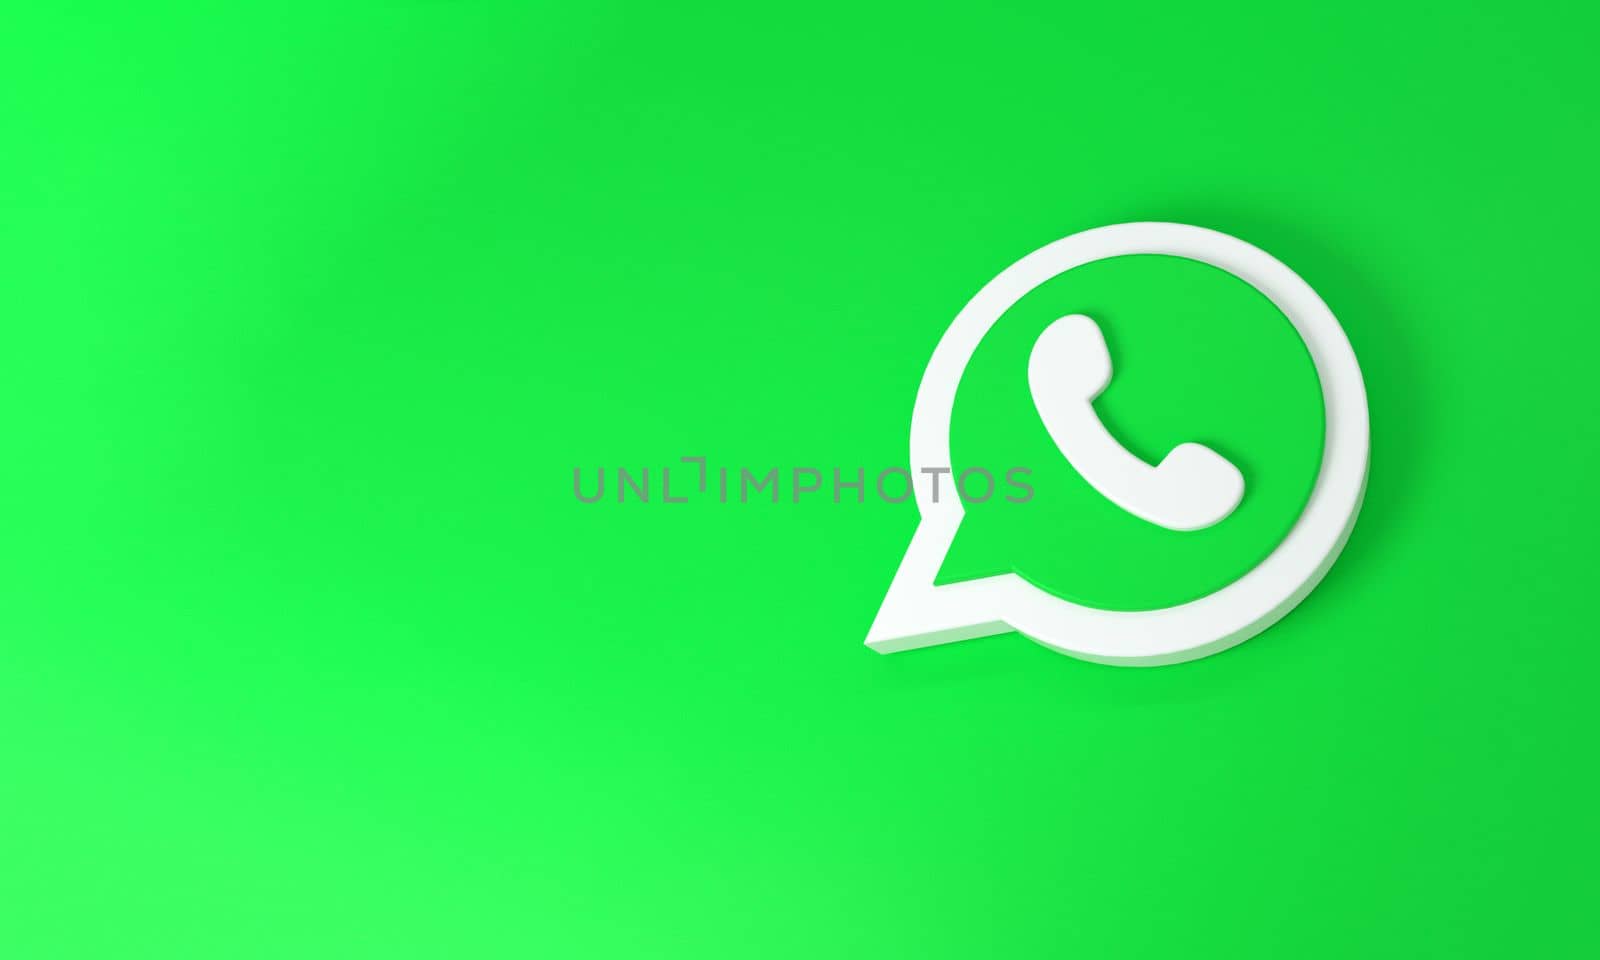 Whatsapp logo with space for text and graphics on green background. 3D rendering.